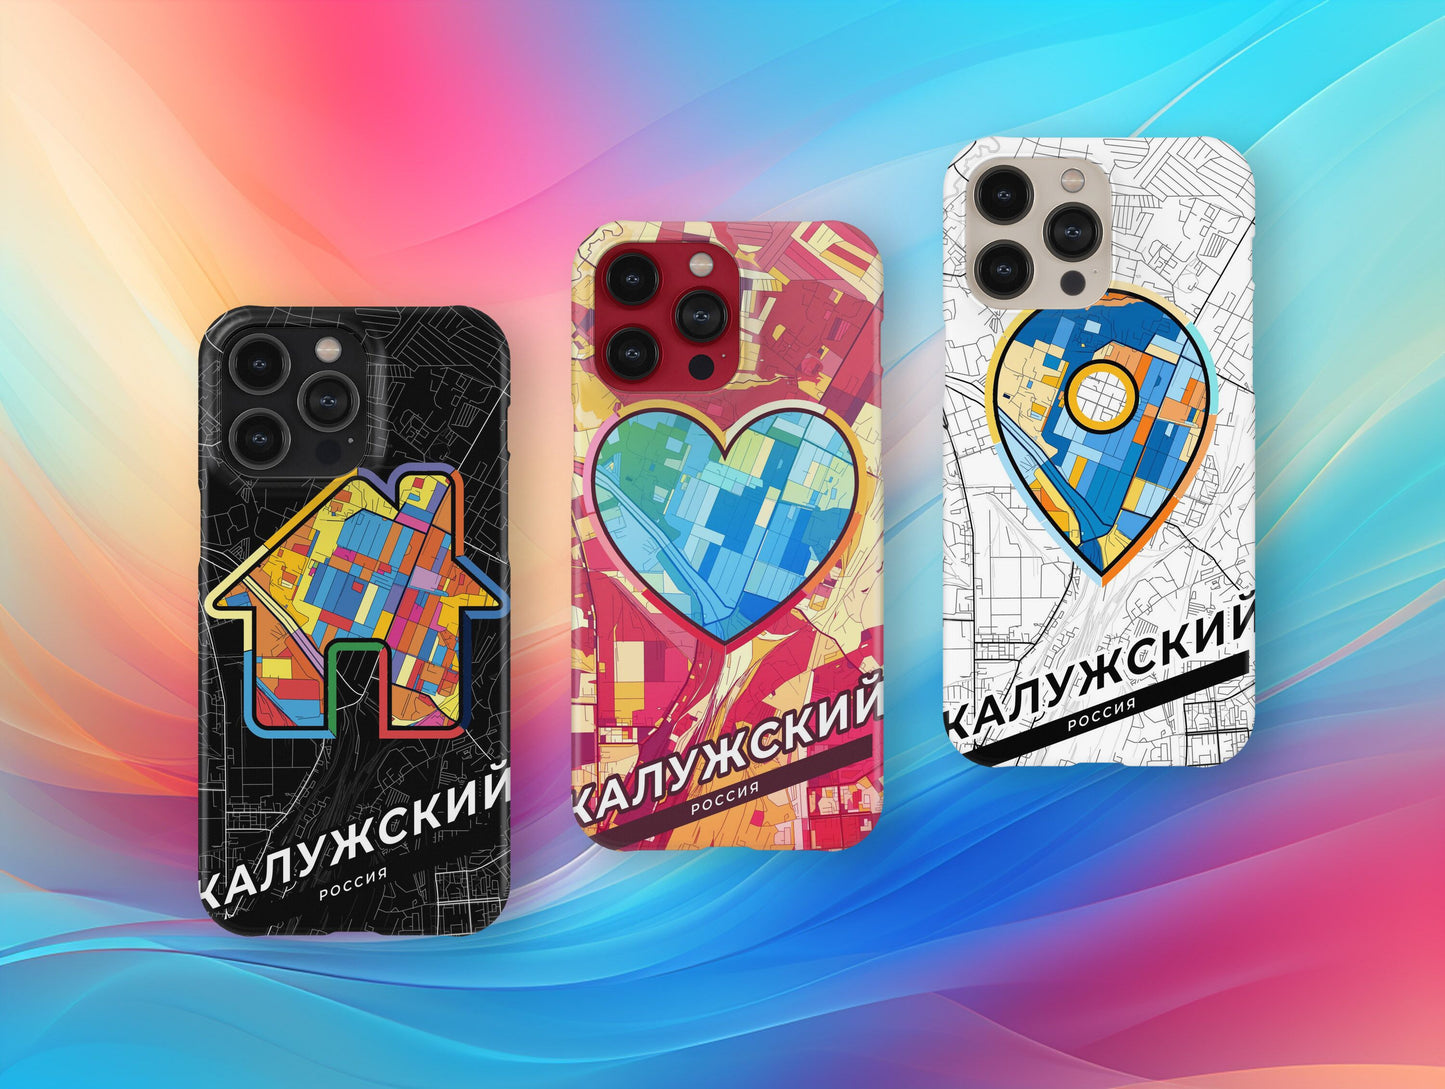 Kaluga Russia slim phone case with colorful icon. Birthday, wedding or housewarming gift. Couple match cases.